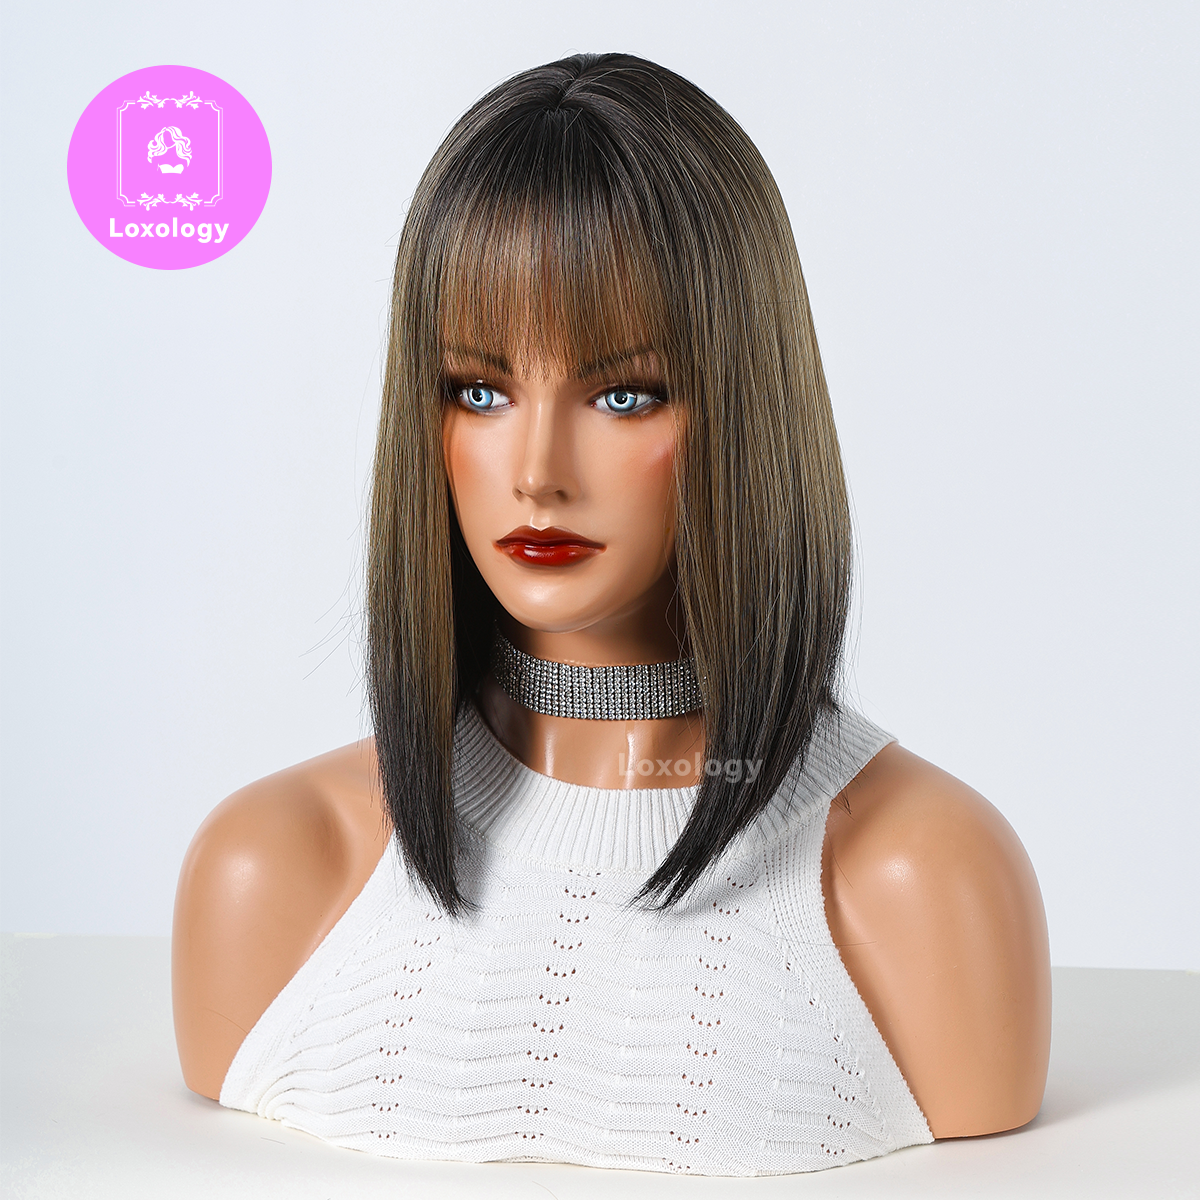 【Oona】Loxology | 14 Inches Long Straight Blonde Ombre Black Wigs Bangs Synthetic Wigs Women's Wigs for Daily